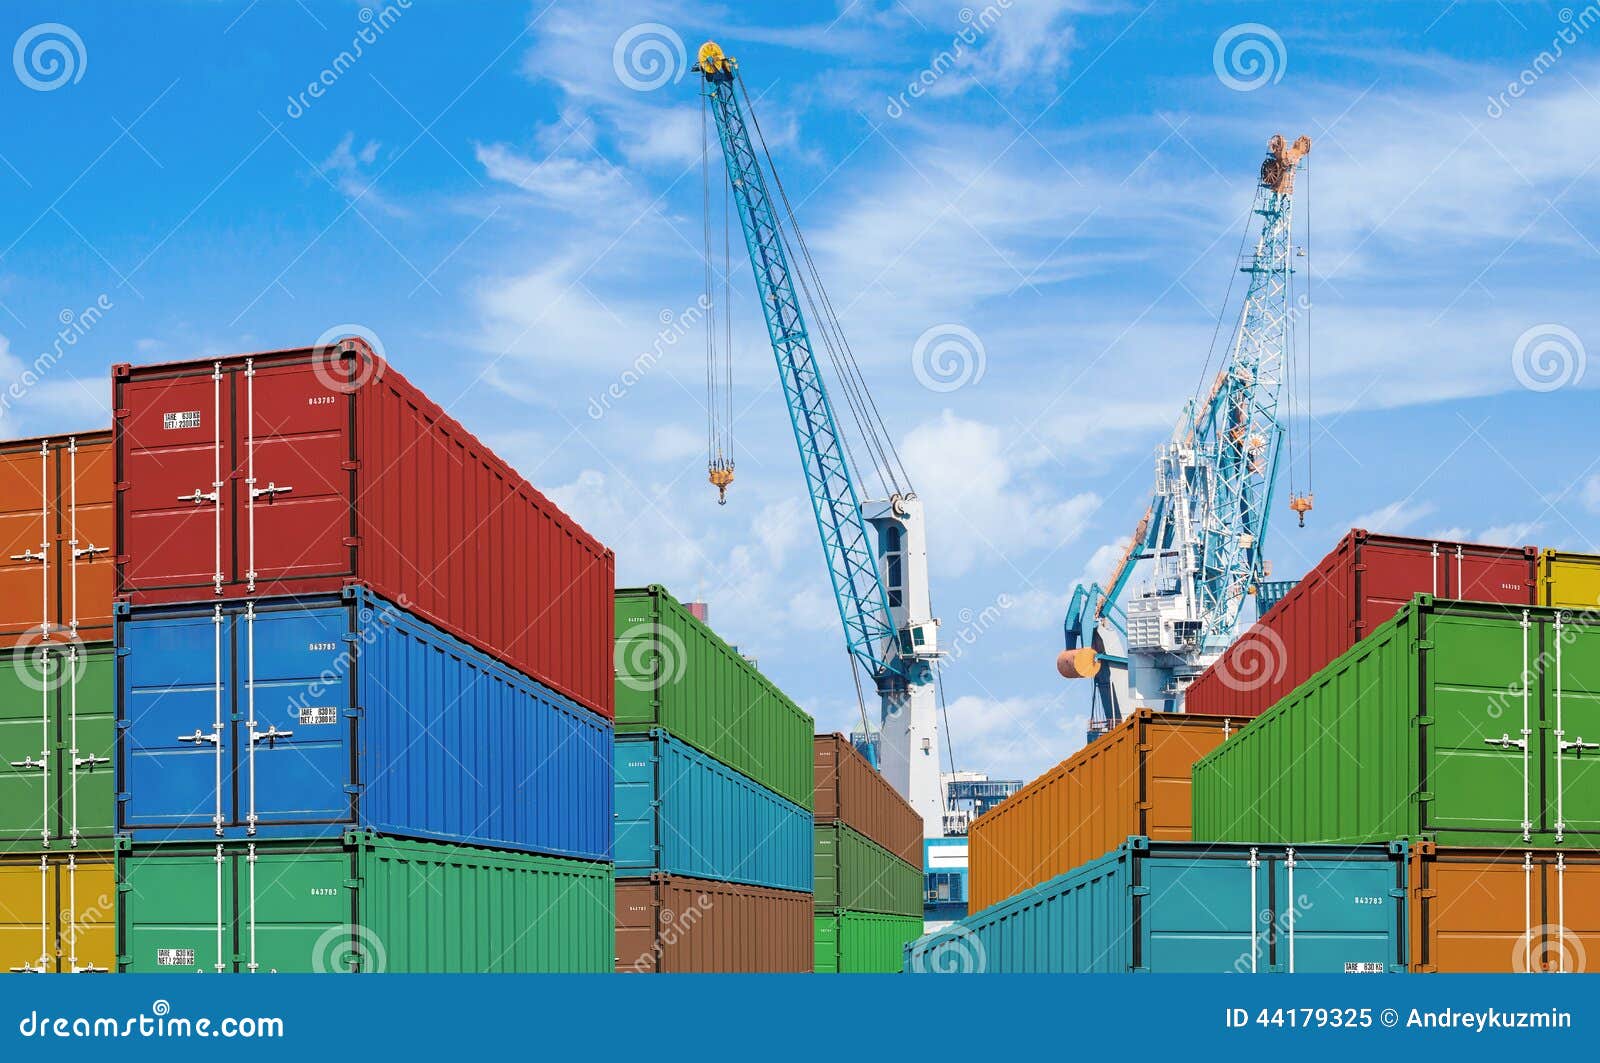 export or import shipping cargo container stacks